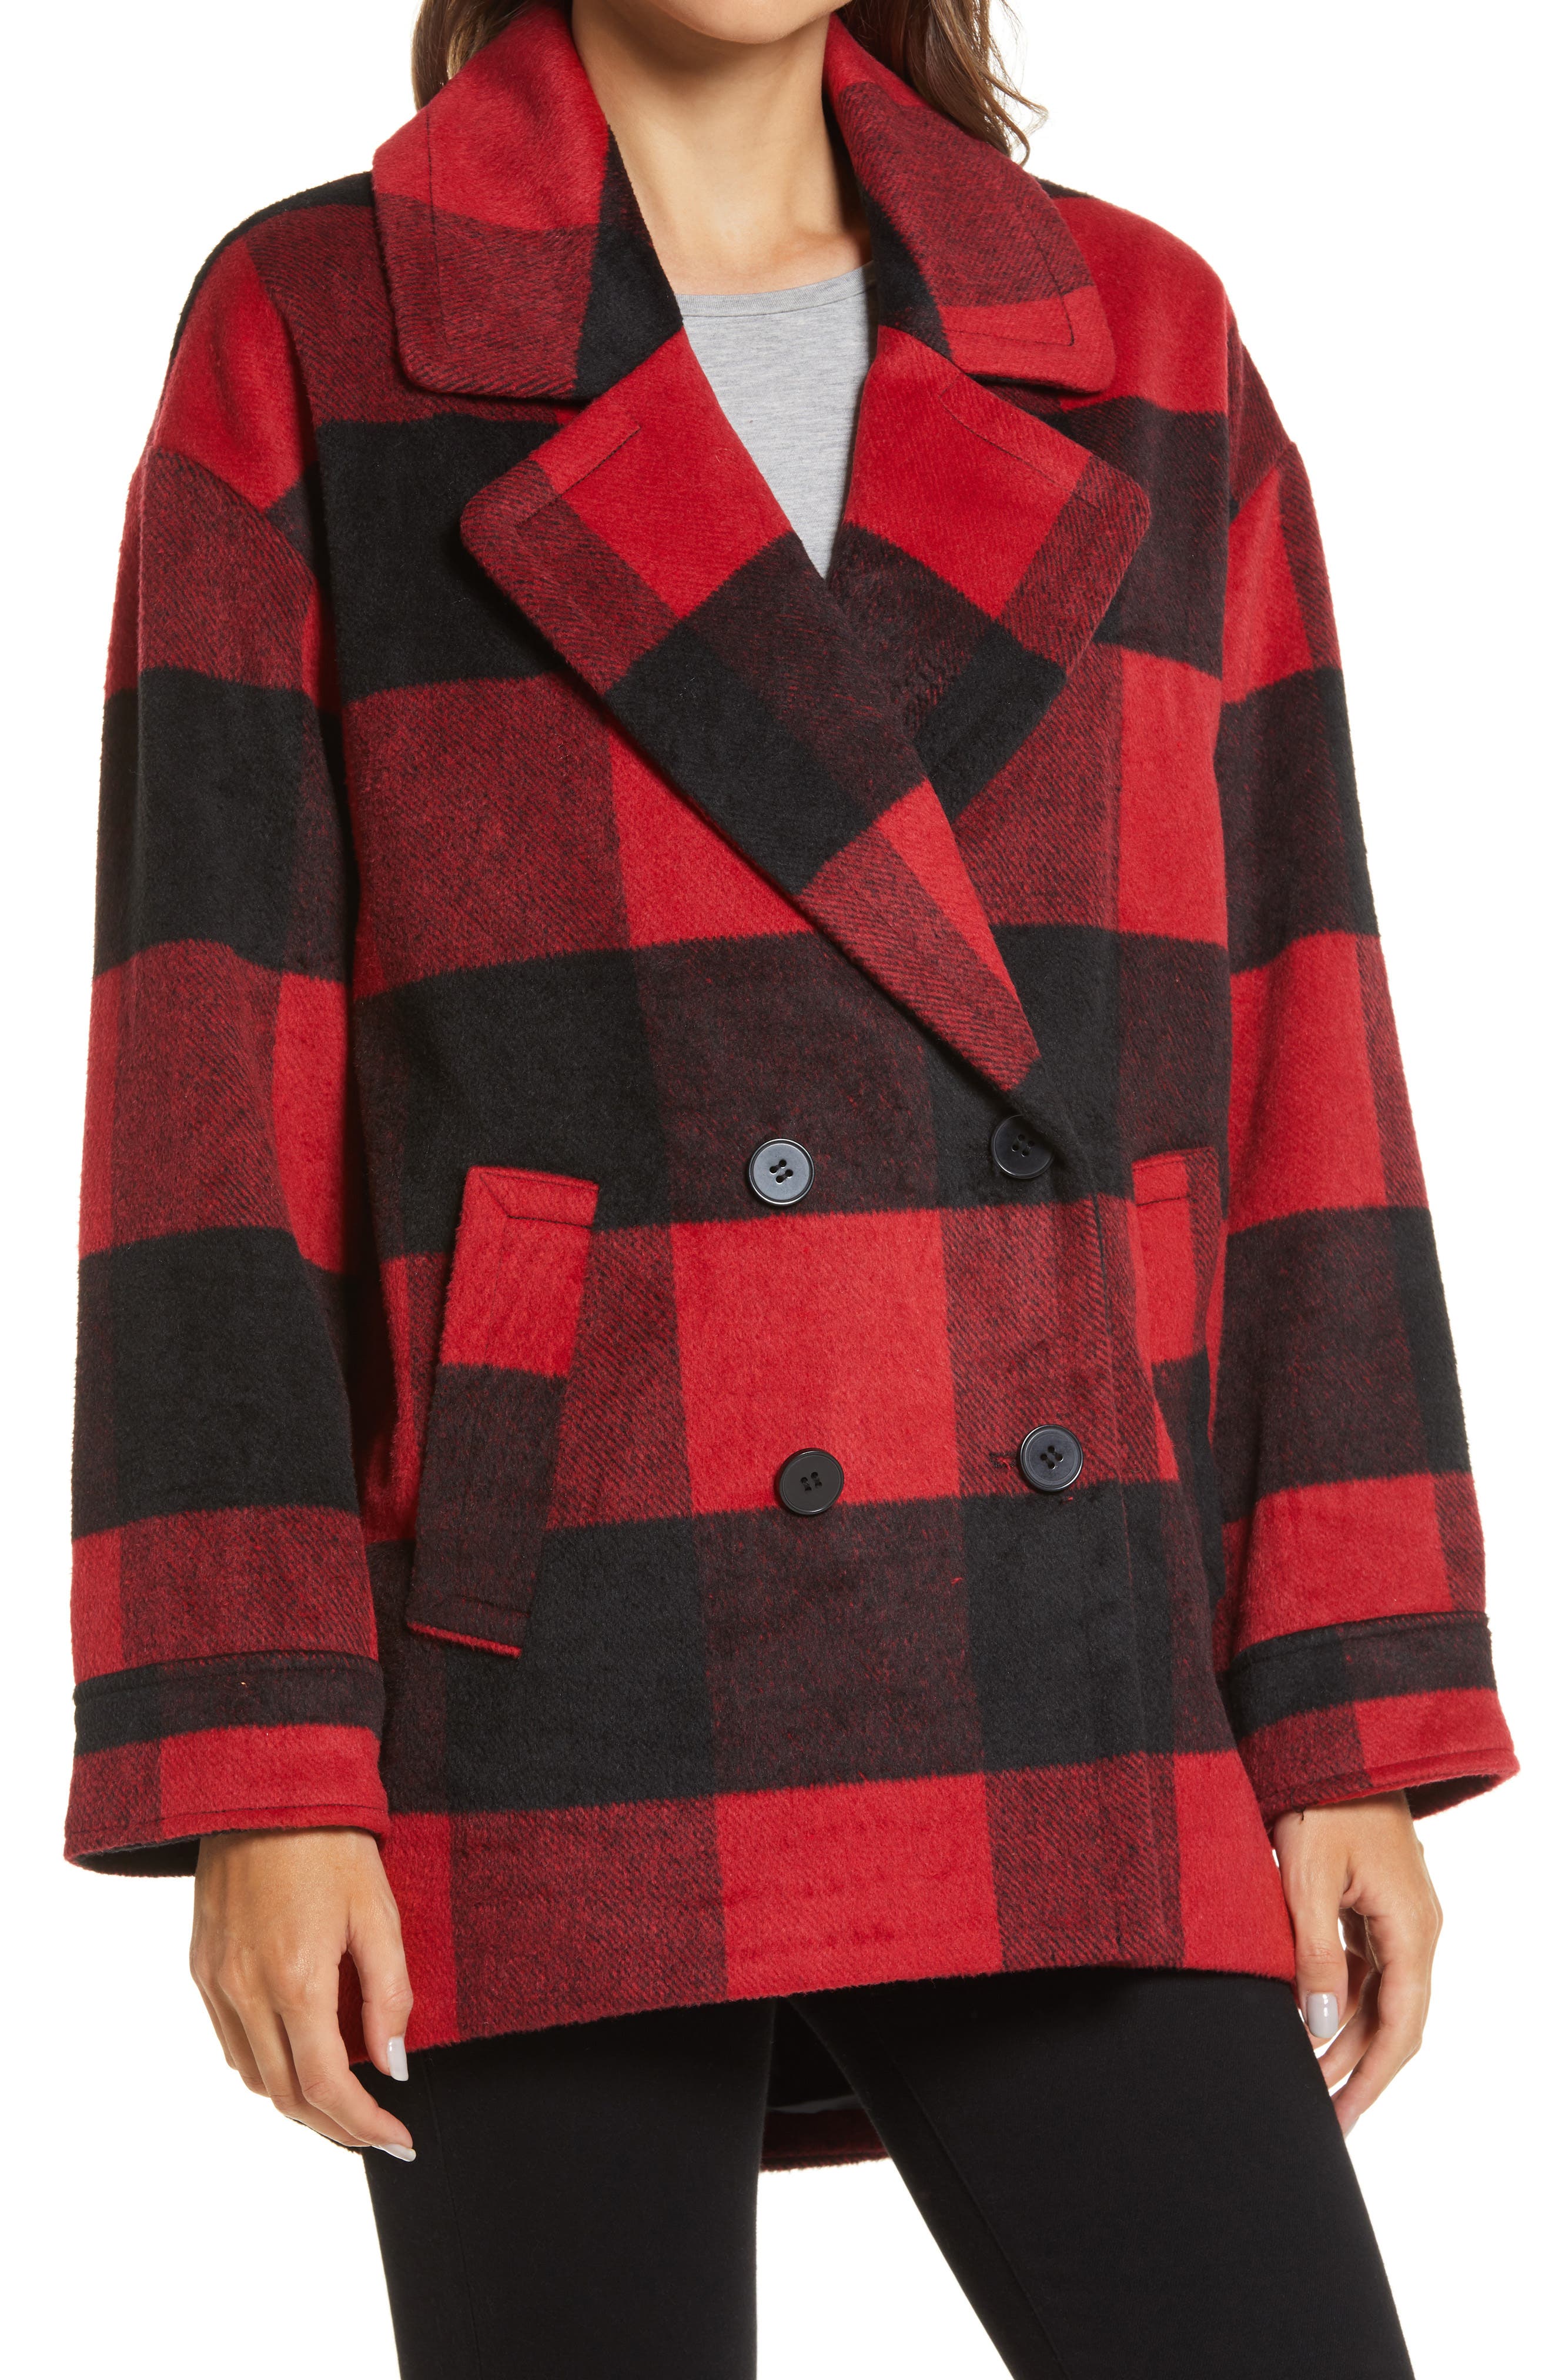 Halogen | Buffalo Check Print Double Breasted Pea Coat | Nordstrom Rack